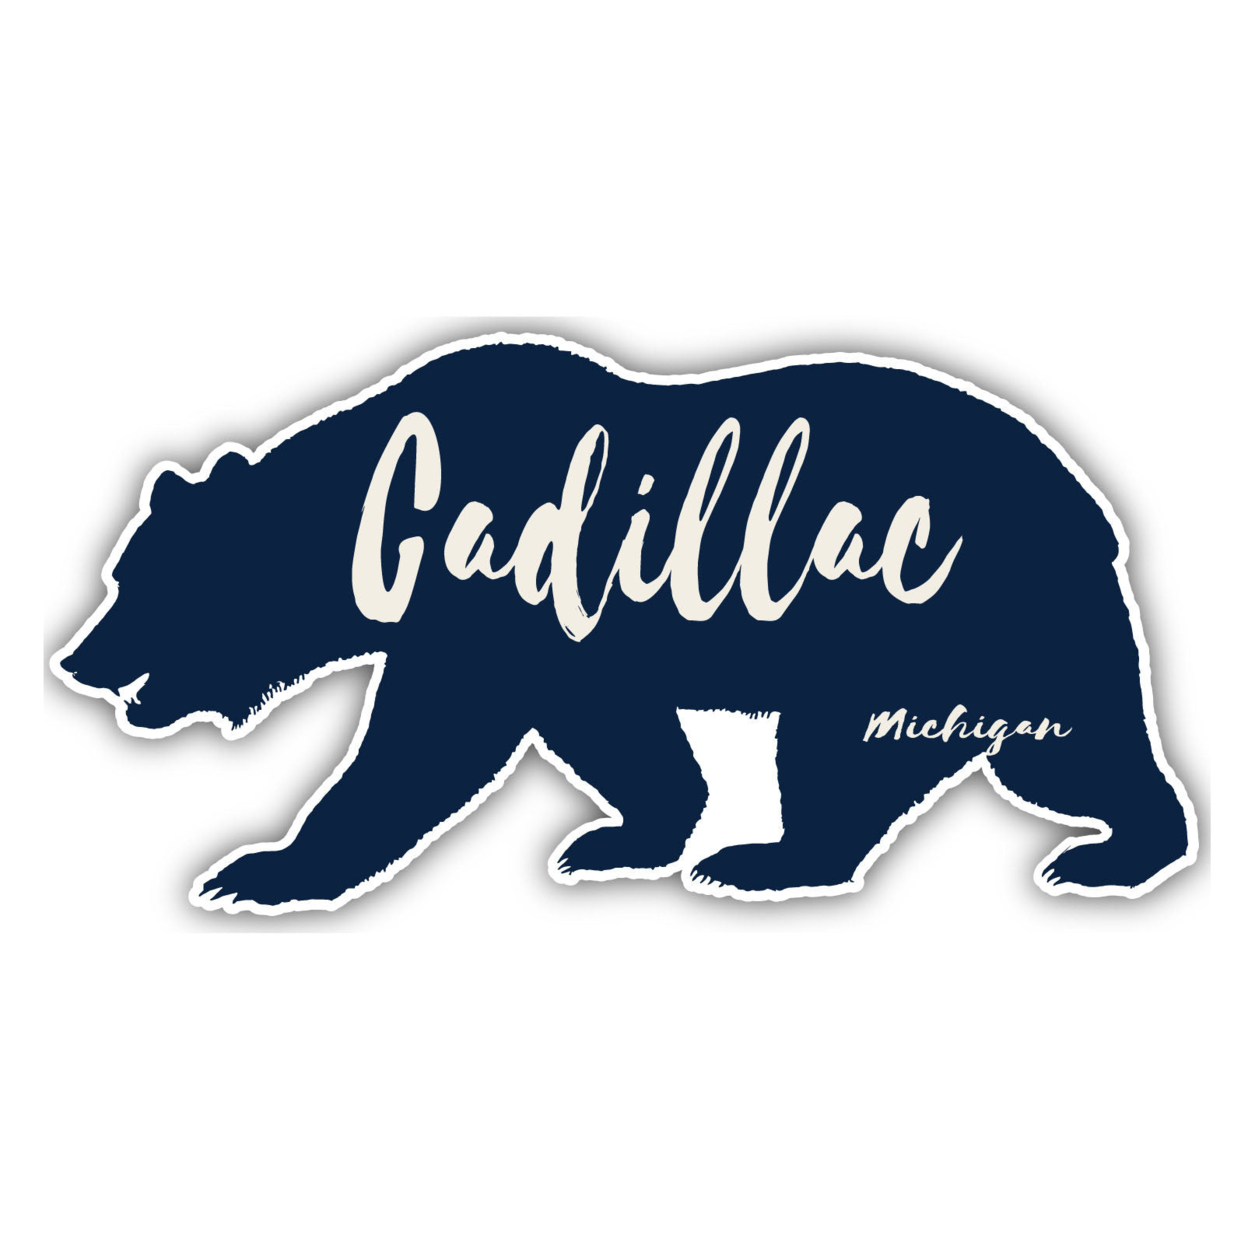 Cadillac Michigan Souvenir Decorative Stickers (Choose Theme And Size) - 4-Pack, 4-Inch, Great Outdoors